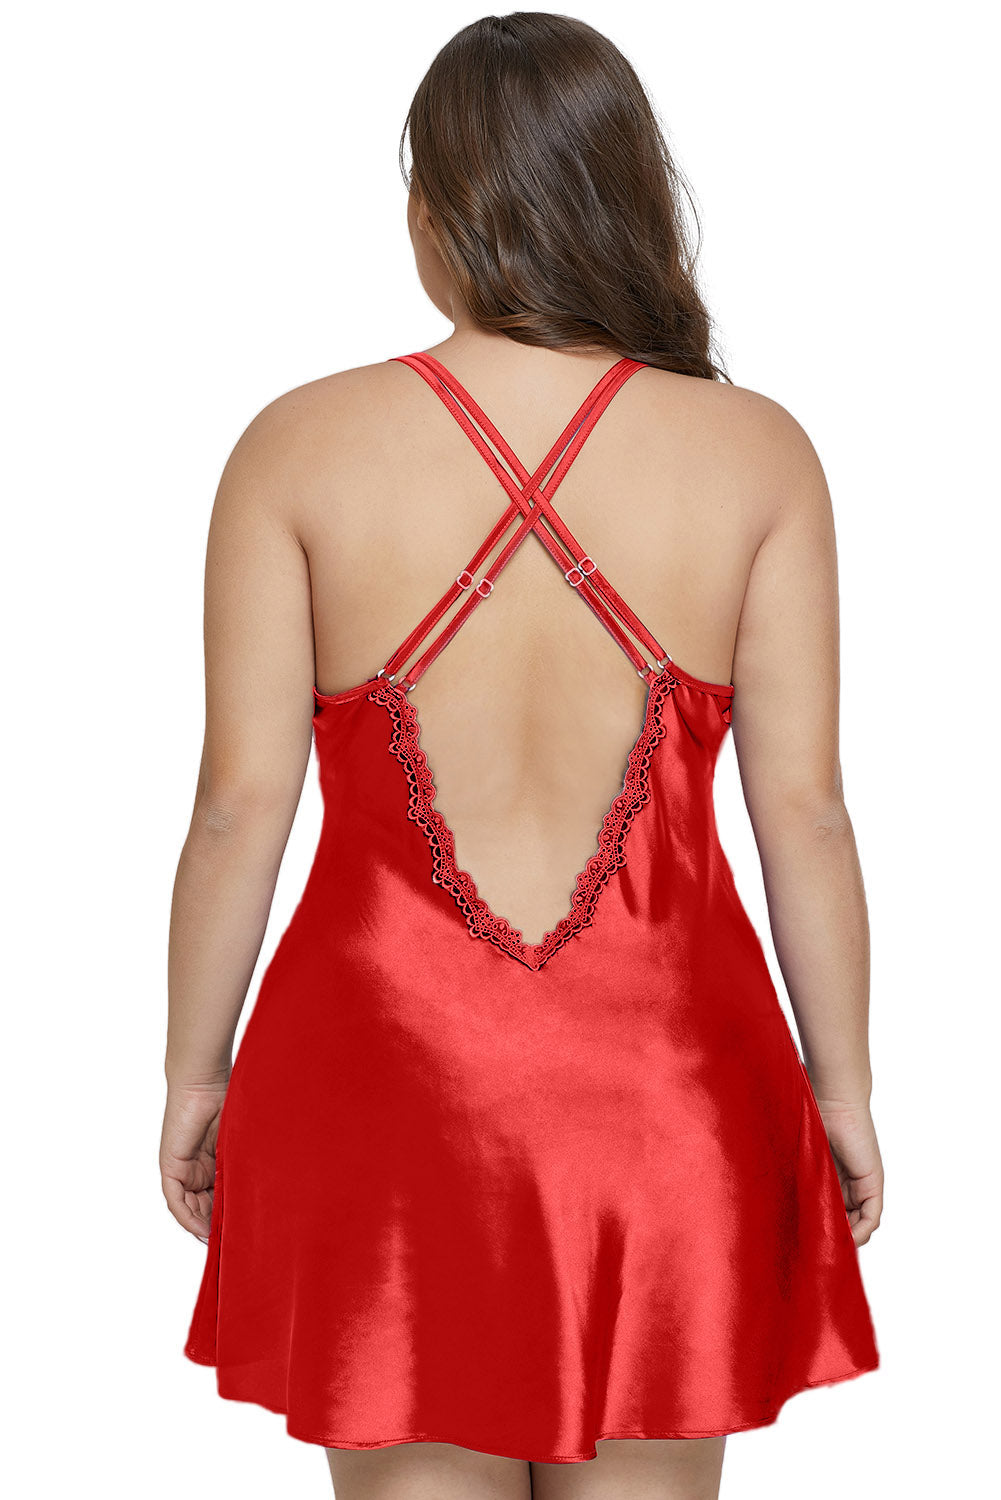 Red Satin and Lace Chemise Set